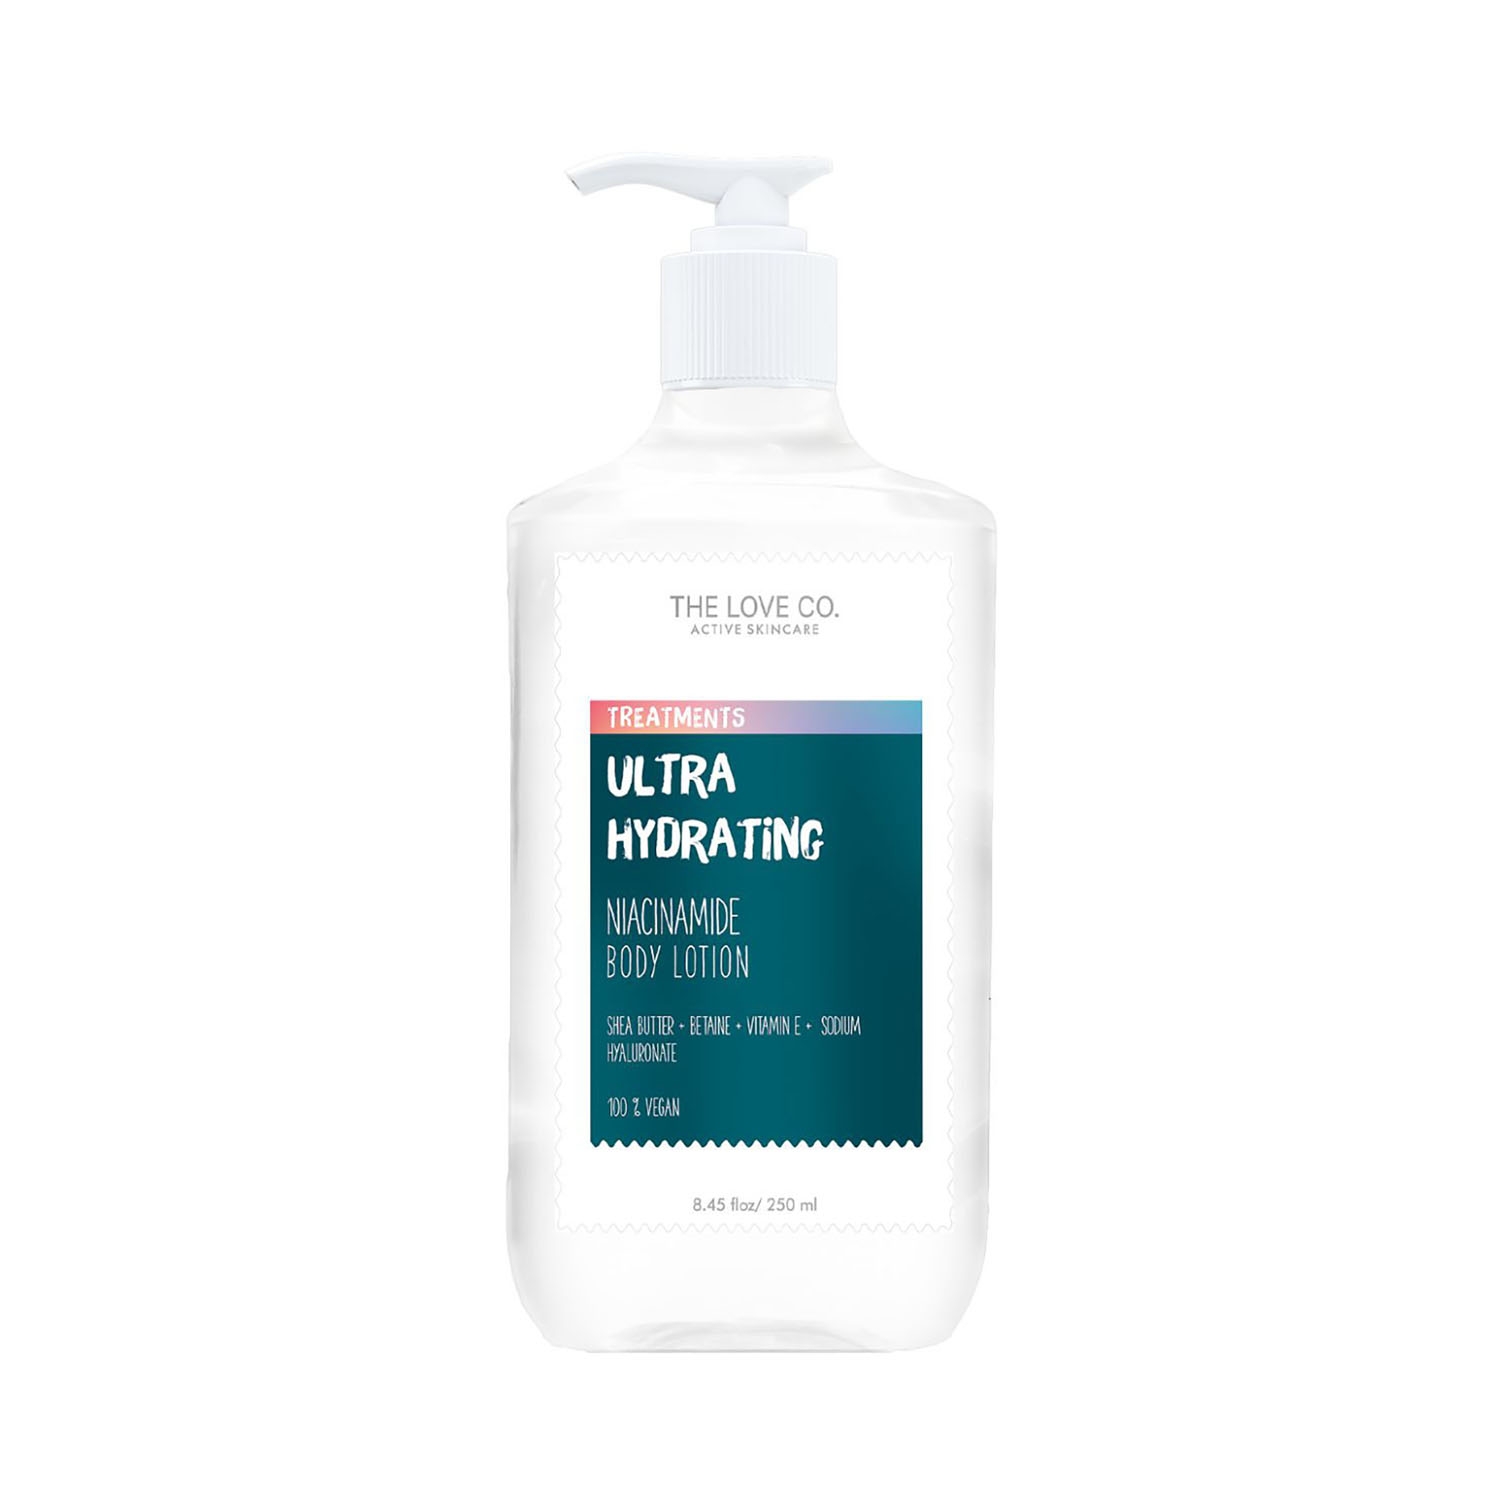 THE LOVE CO. | THE LOVE CO. Ultra Hydrating With Niacinamide Body Lotion (250ml)